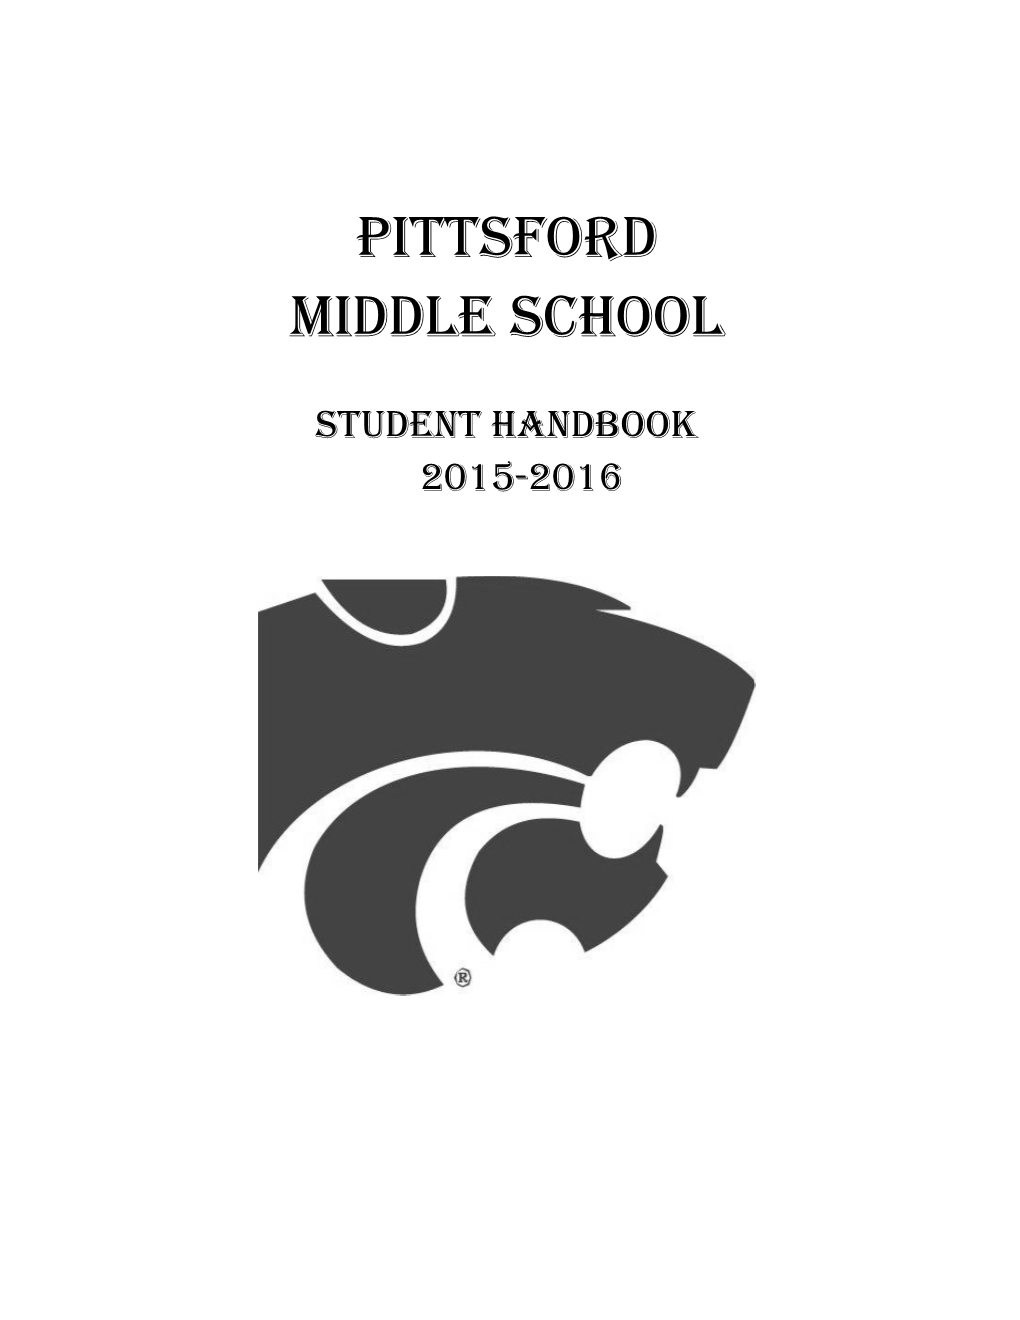 Pittsford MIDDLE School